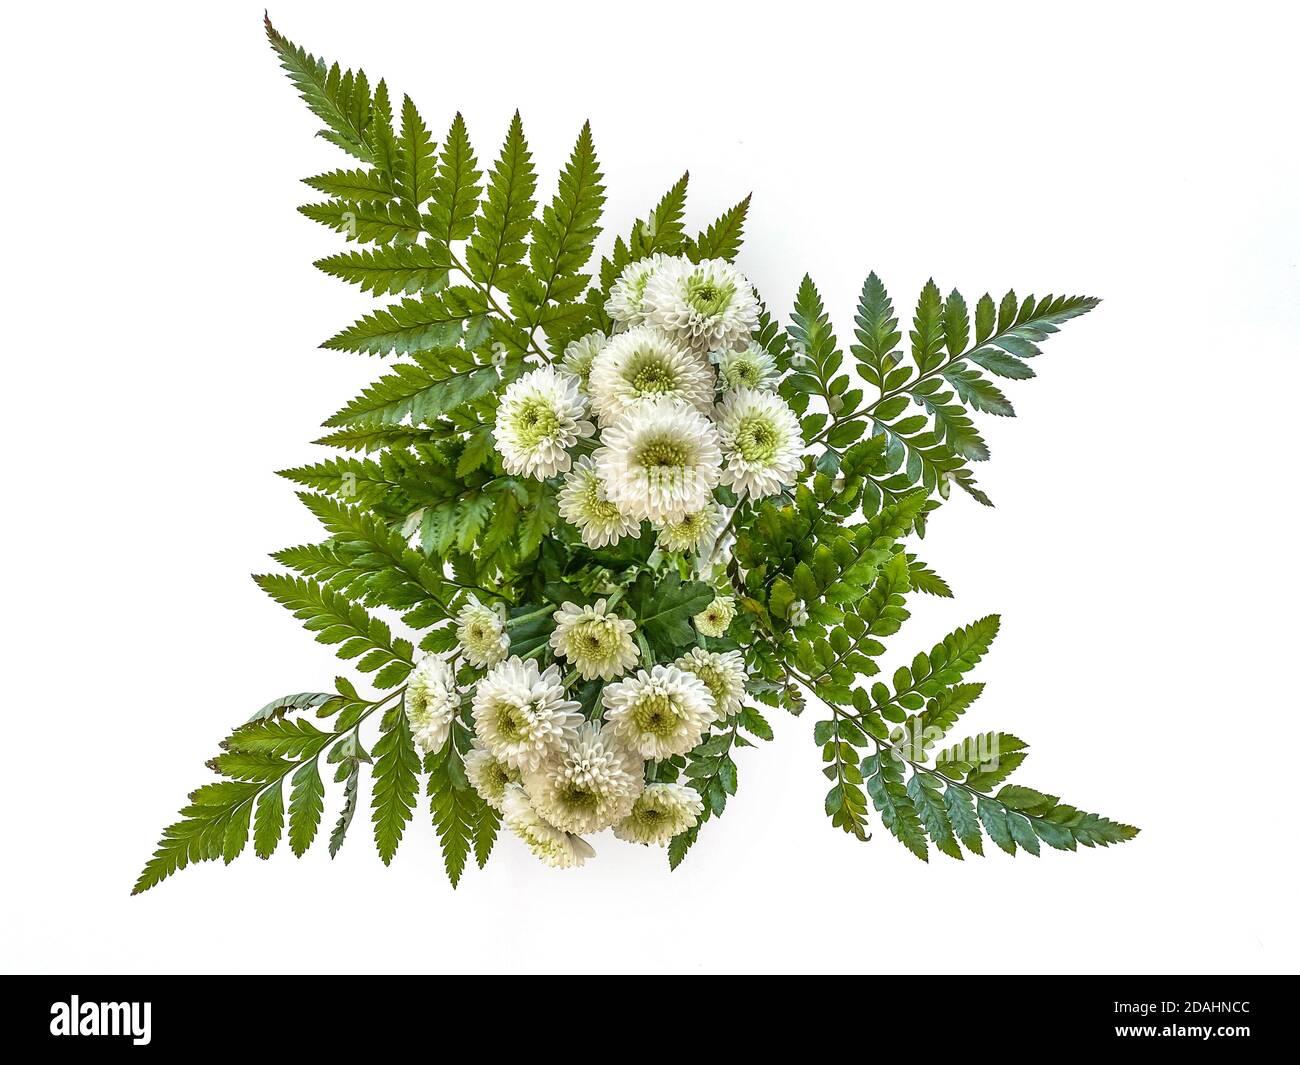 Bunch of White flowers on a white background Stock Photo